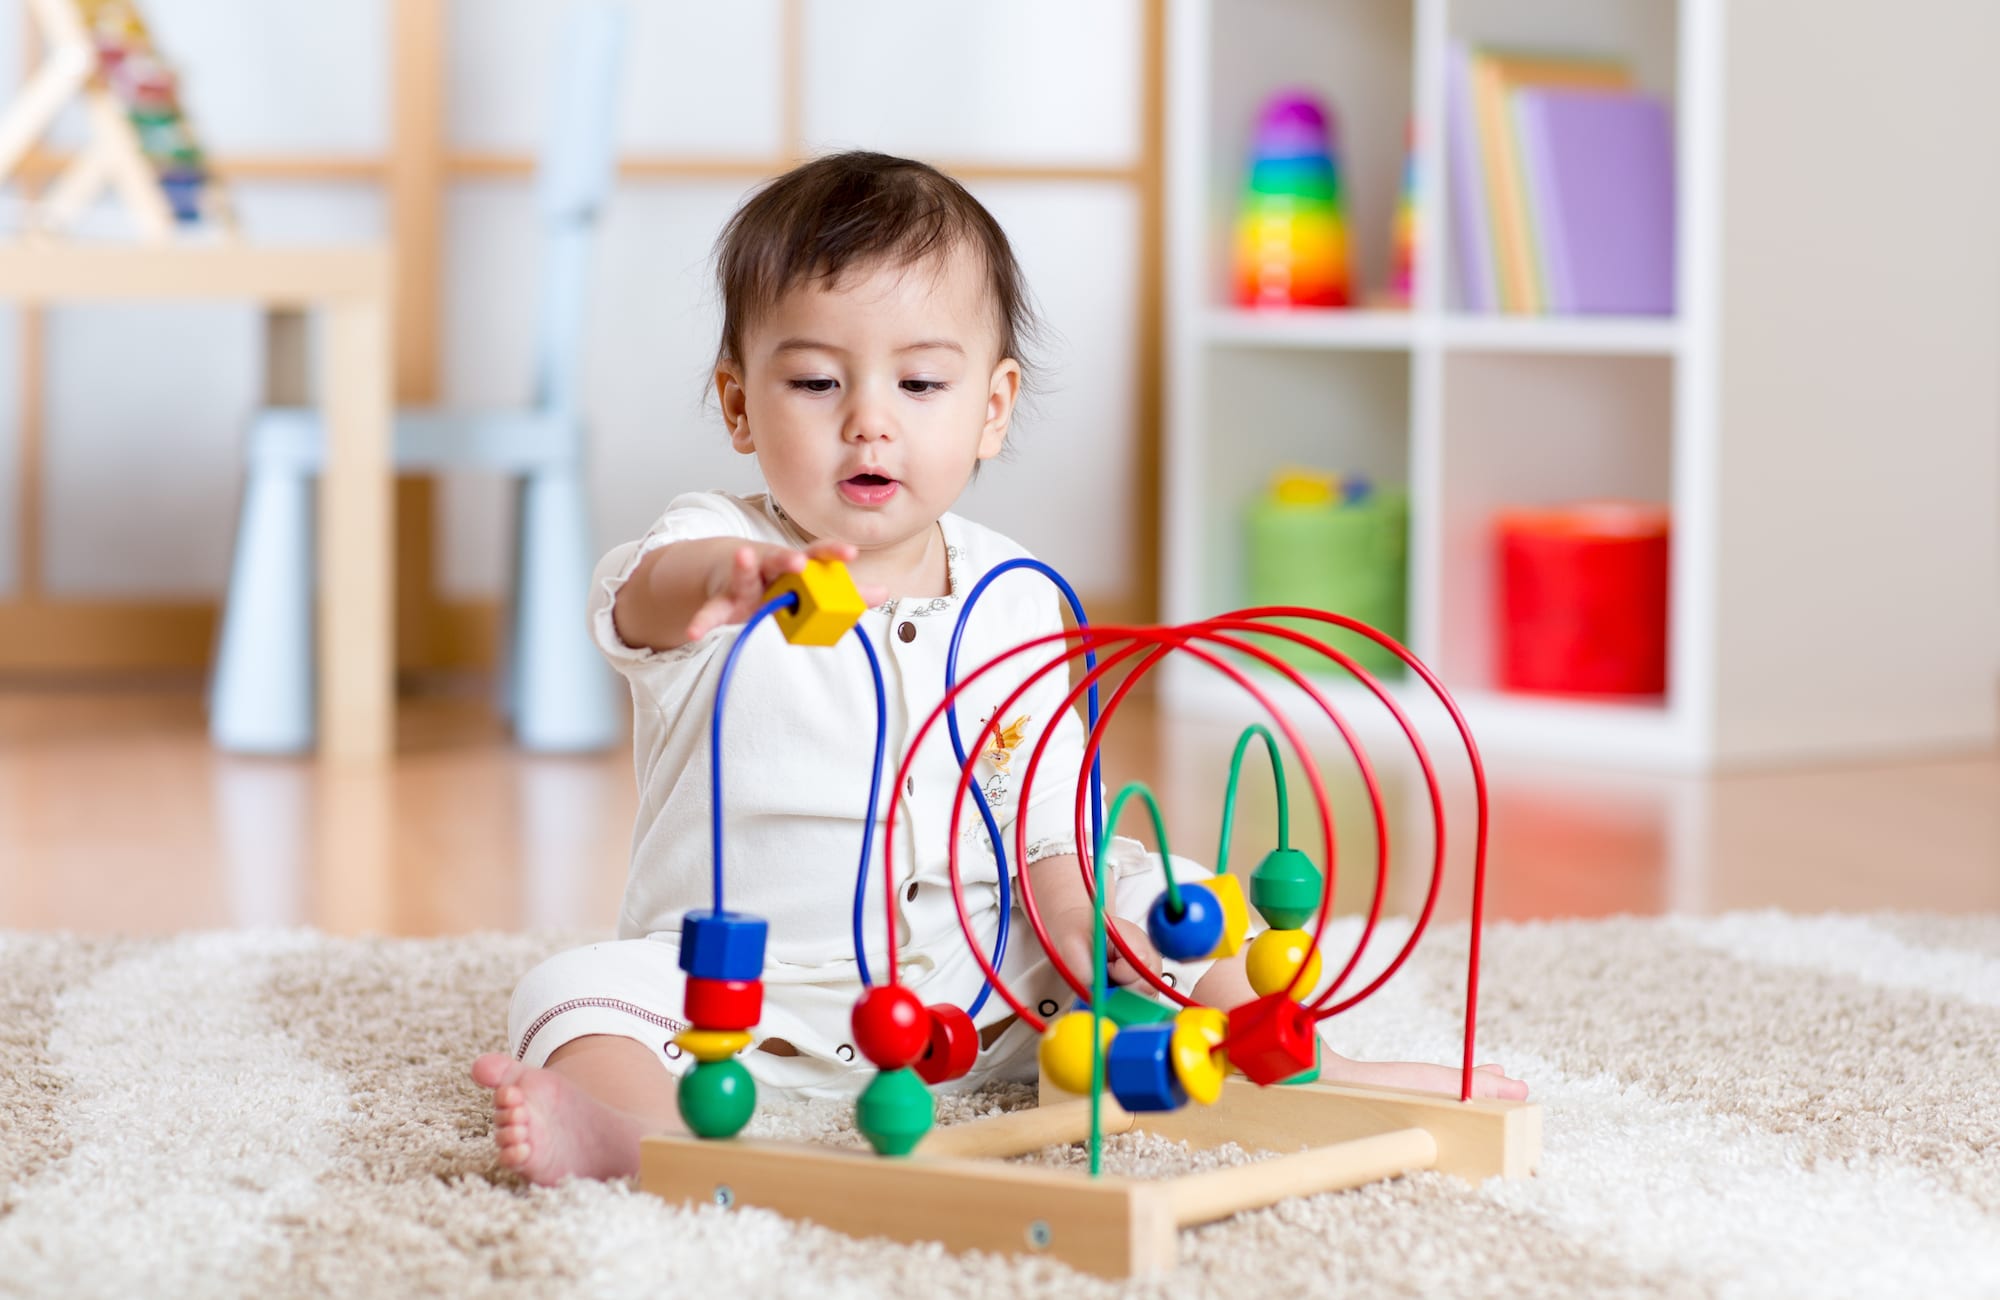 Baby Learning Development Toys: The Best Way to Promote Your Baby’s Growth and Development